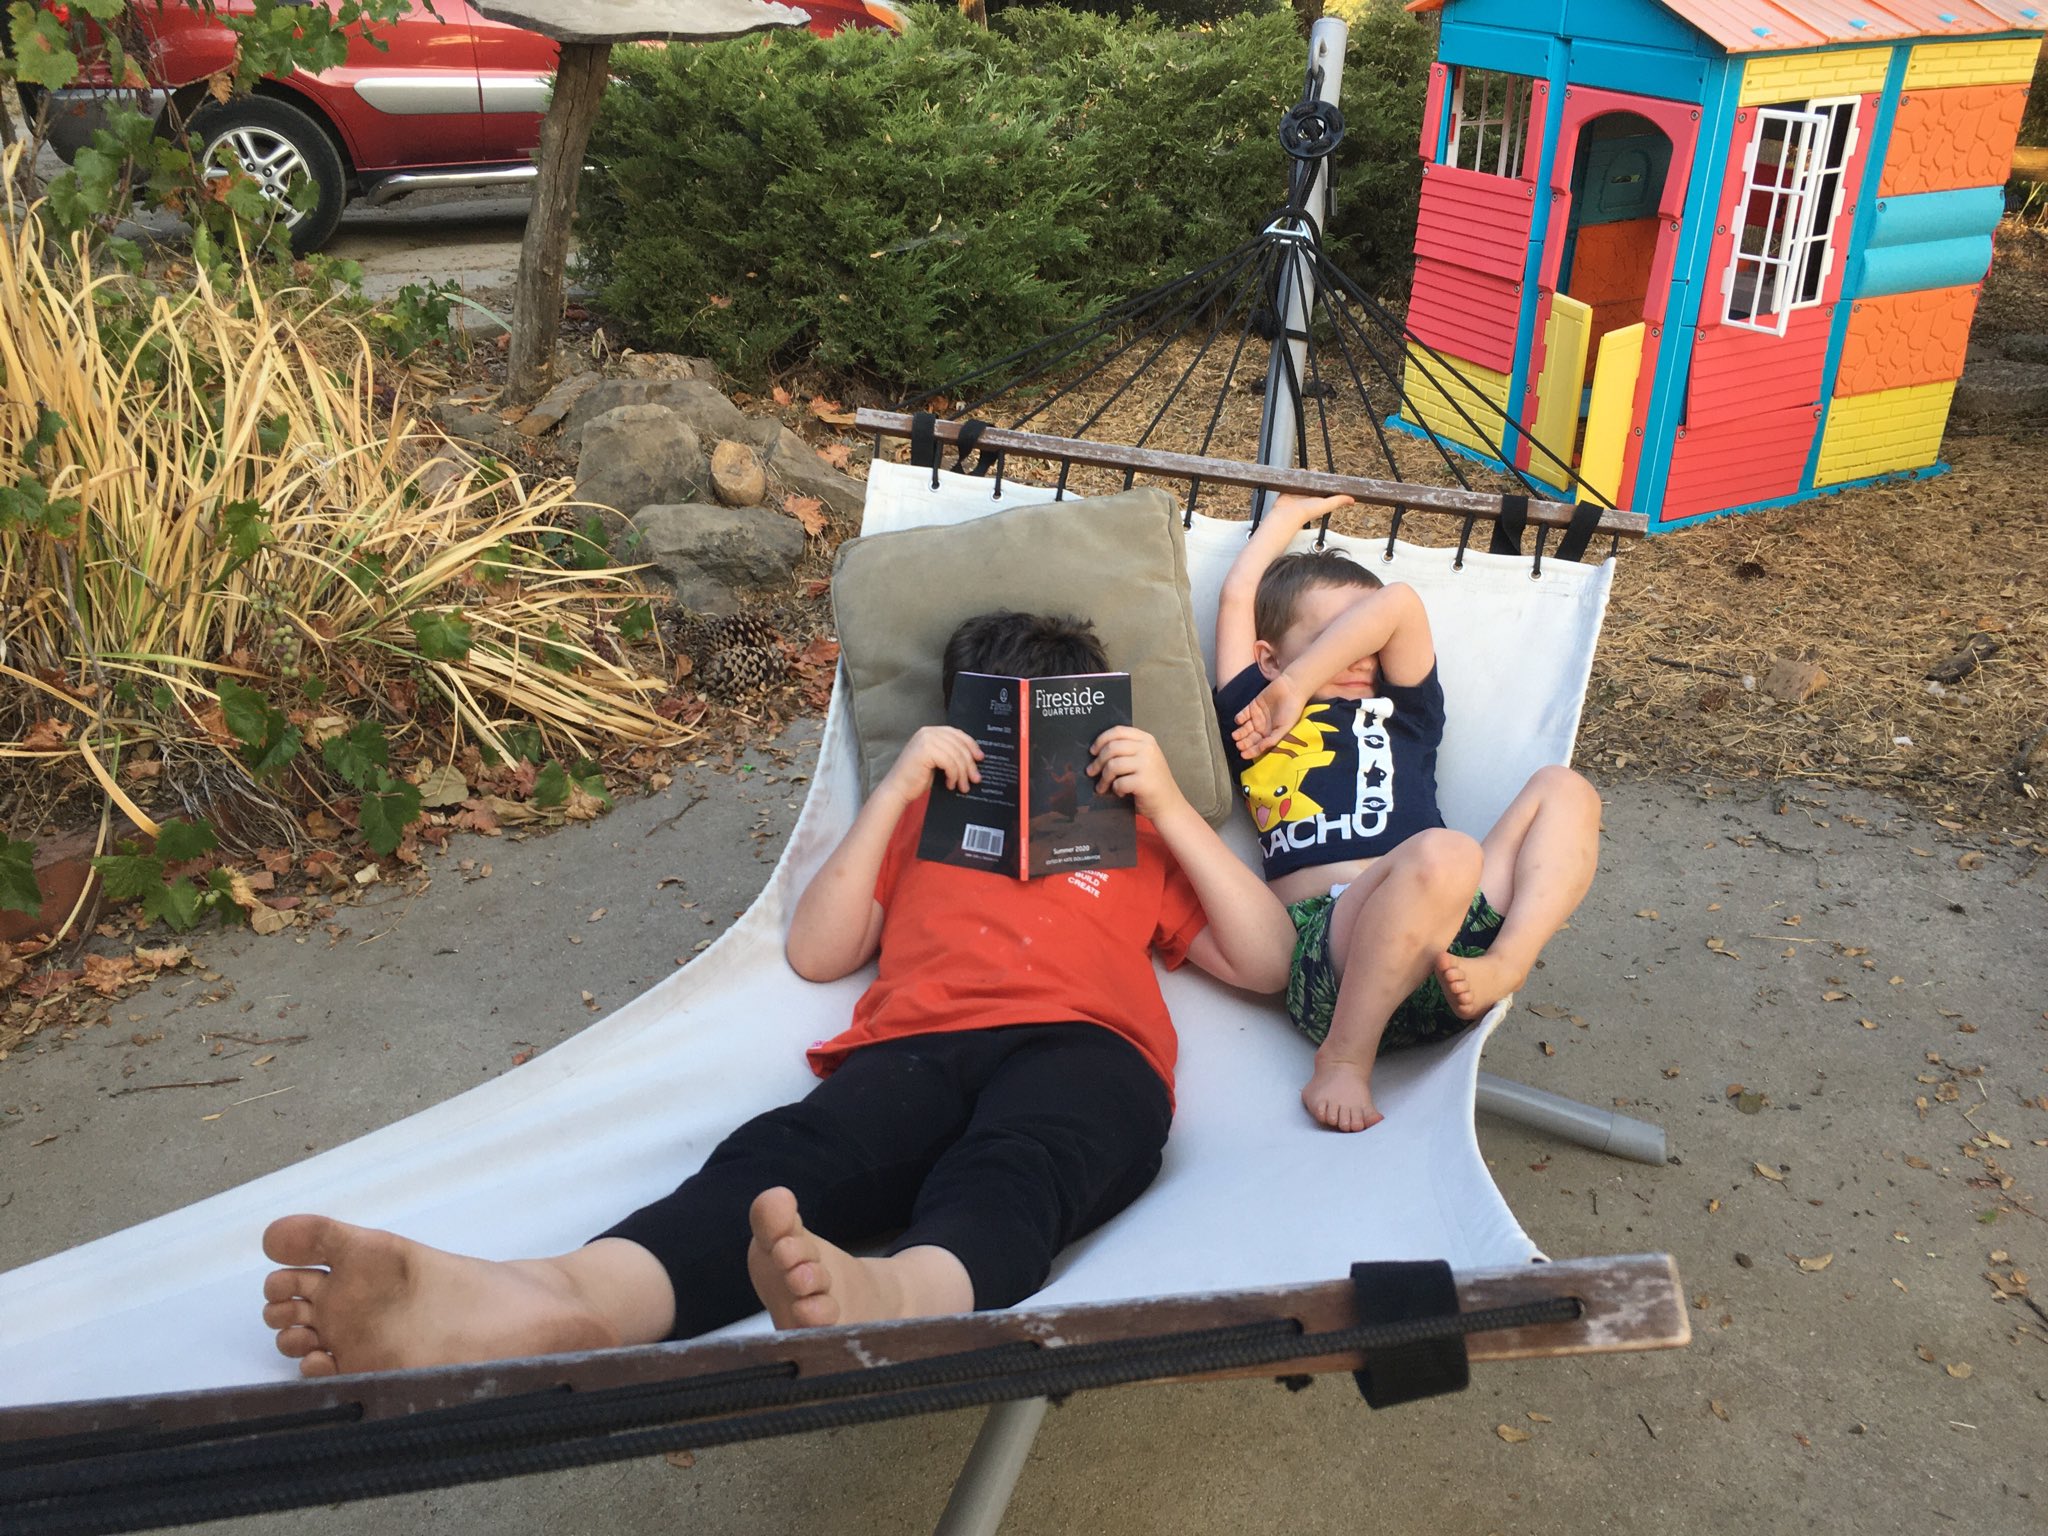 Calvin and Julian laying on a white hammock. Calvin is covering his face with a Fireside Magazine and Julian is covering his face with his arm.